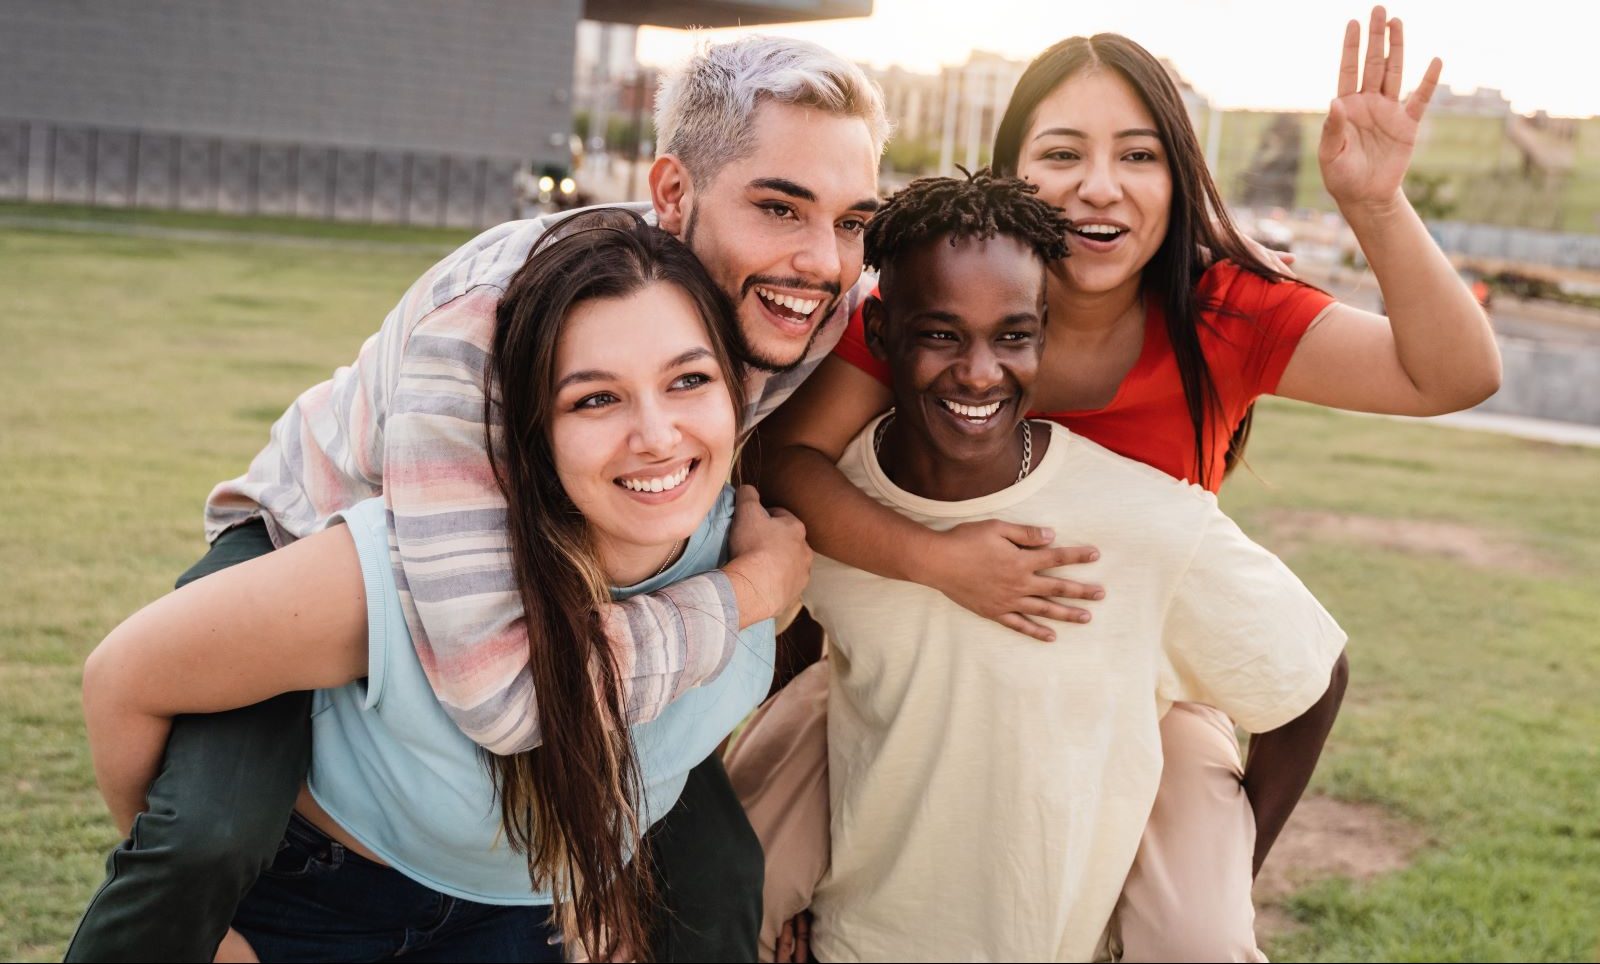 Four young LGBTQ+ people pose happily for a photo.